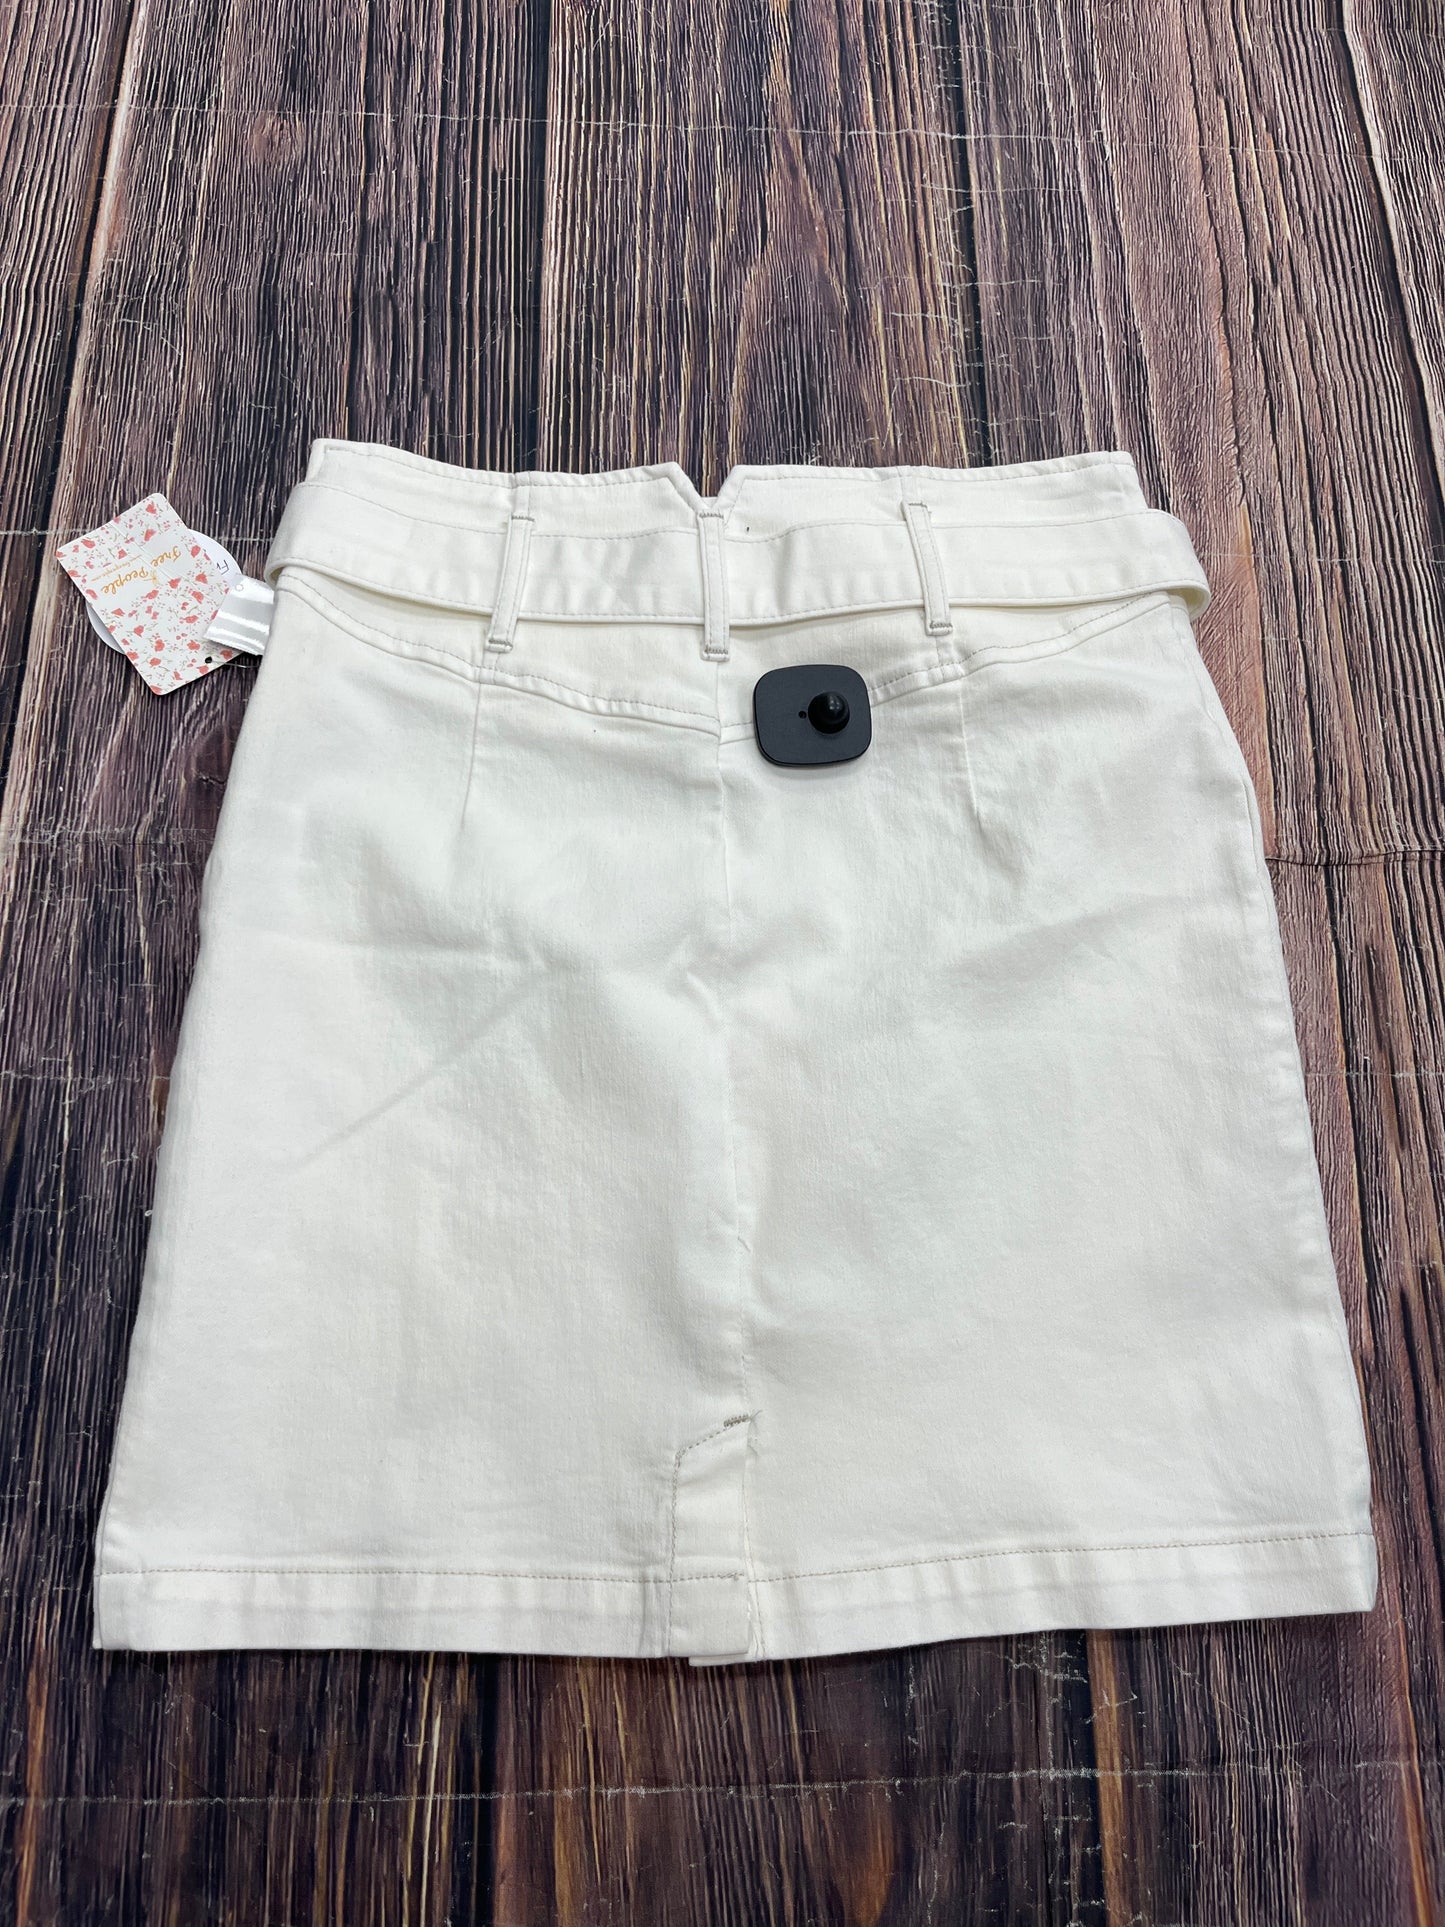 Skirt Mini & Short By Free People  Size: 8